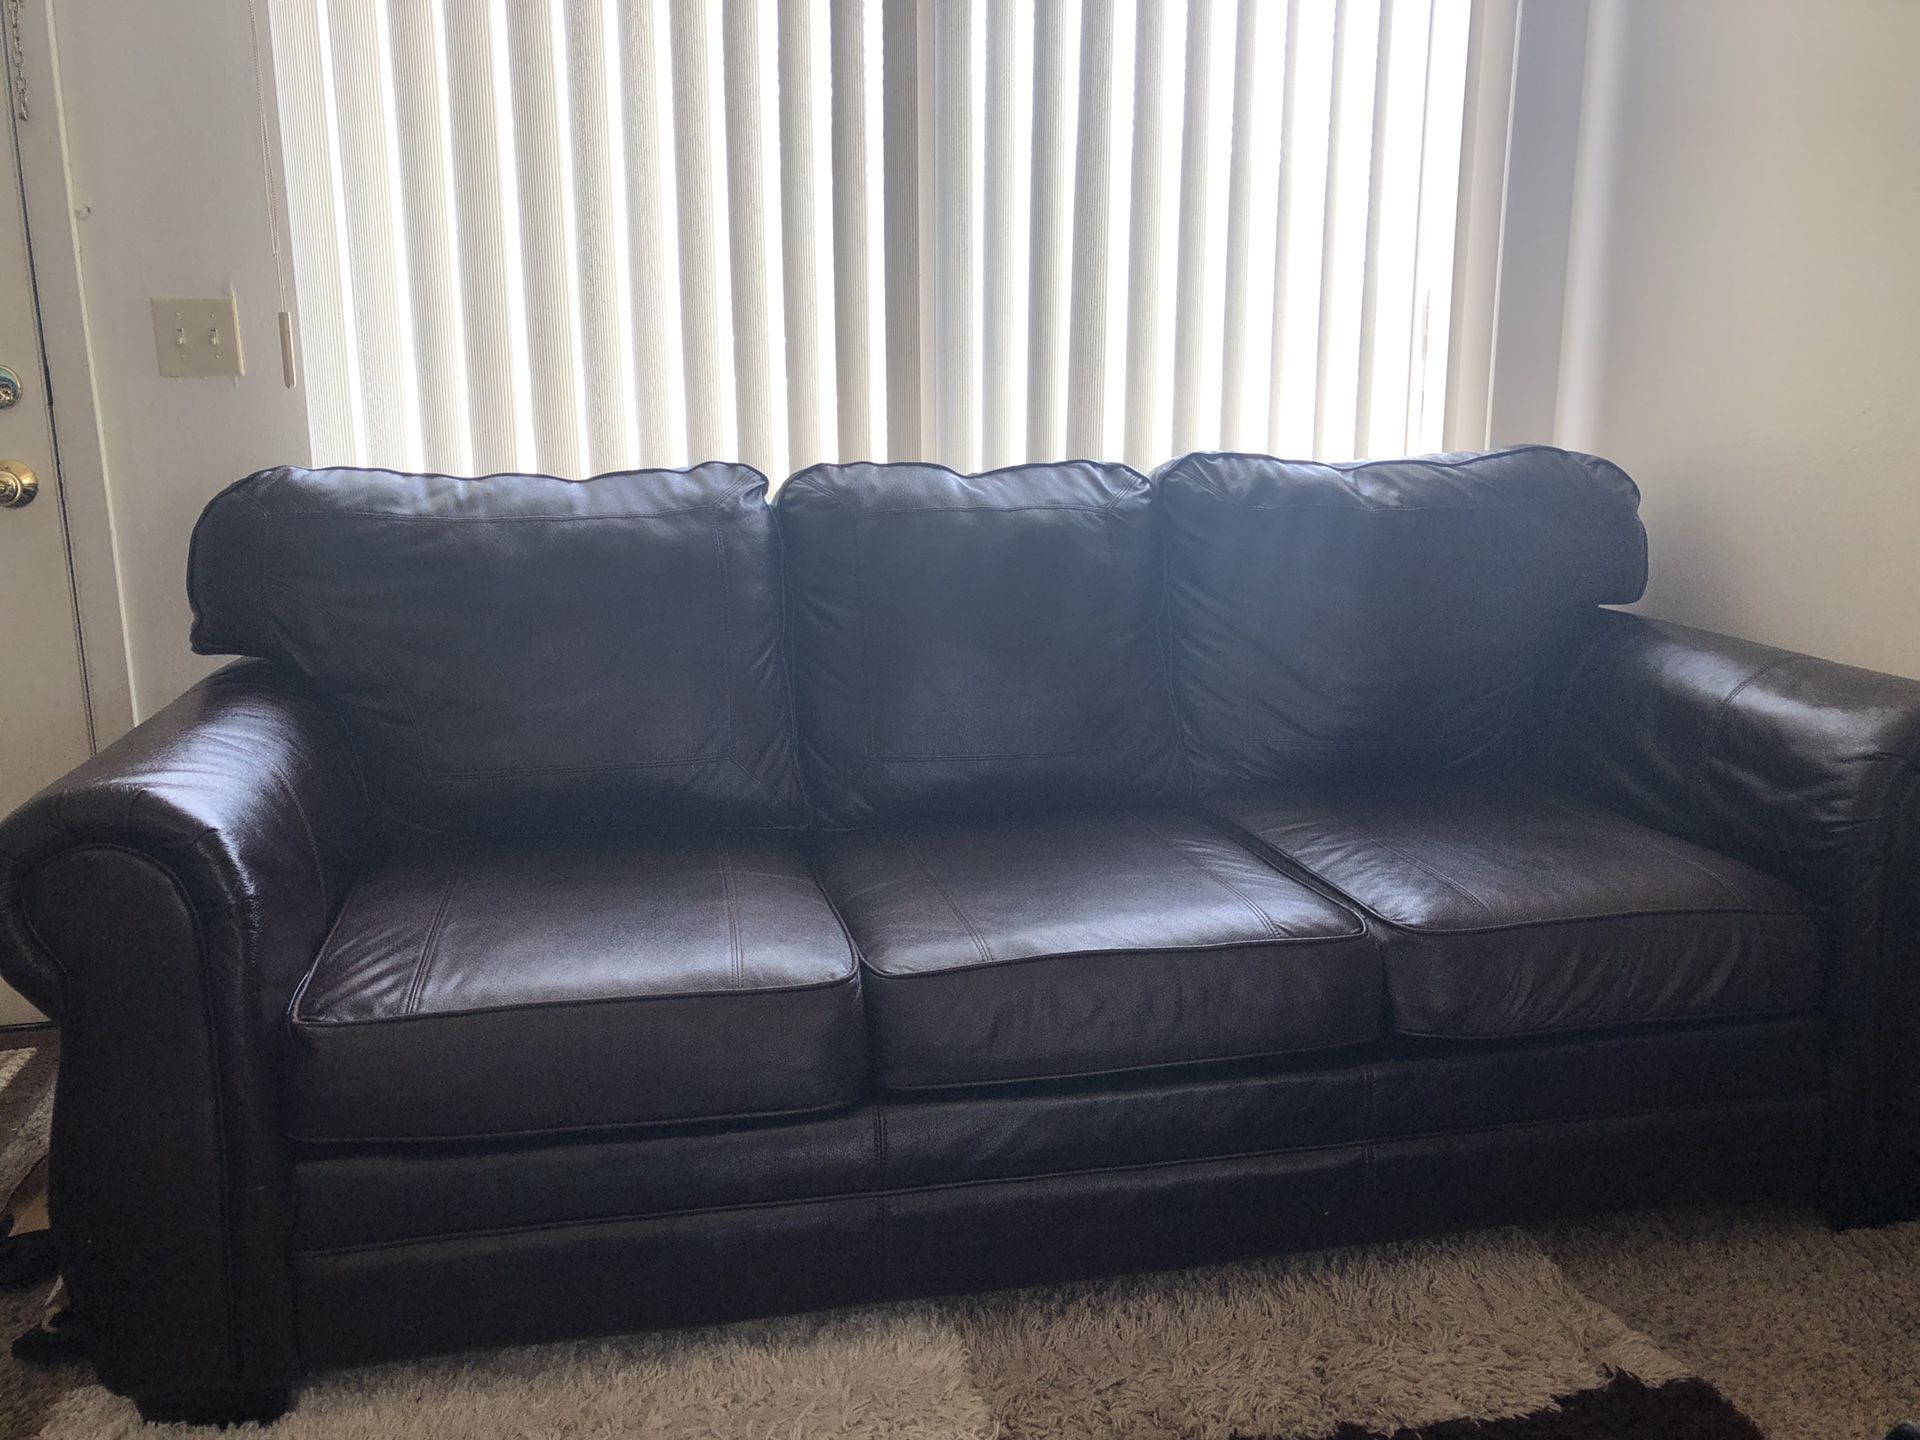 2 leather couches , 3 set tables,and a leather chair